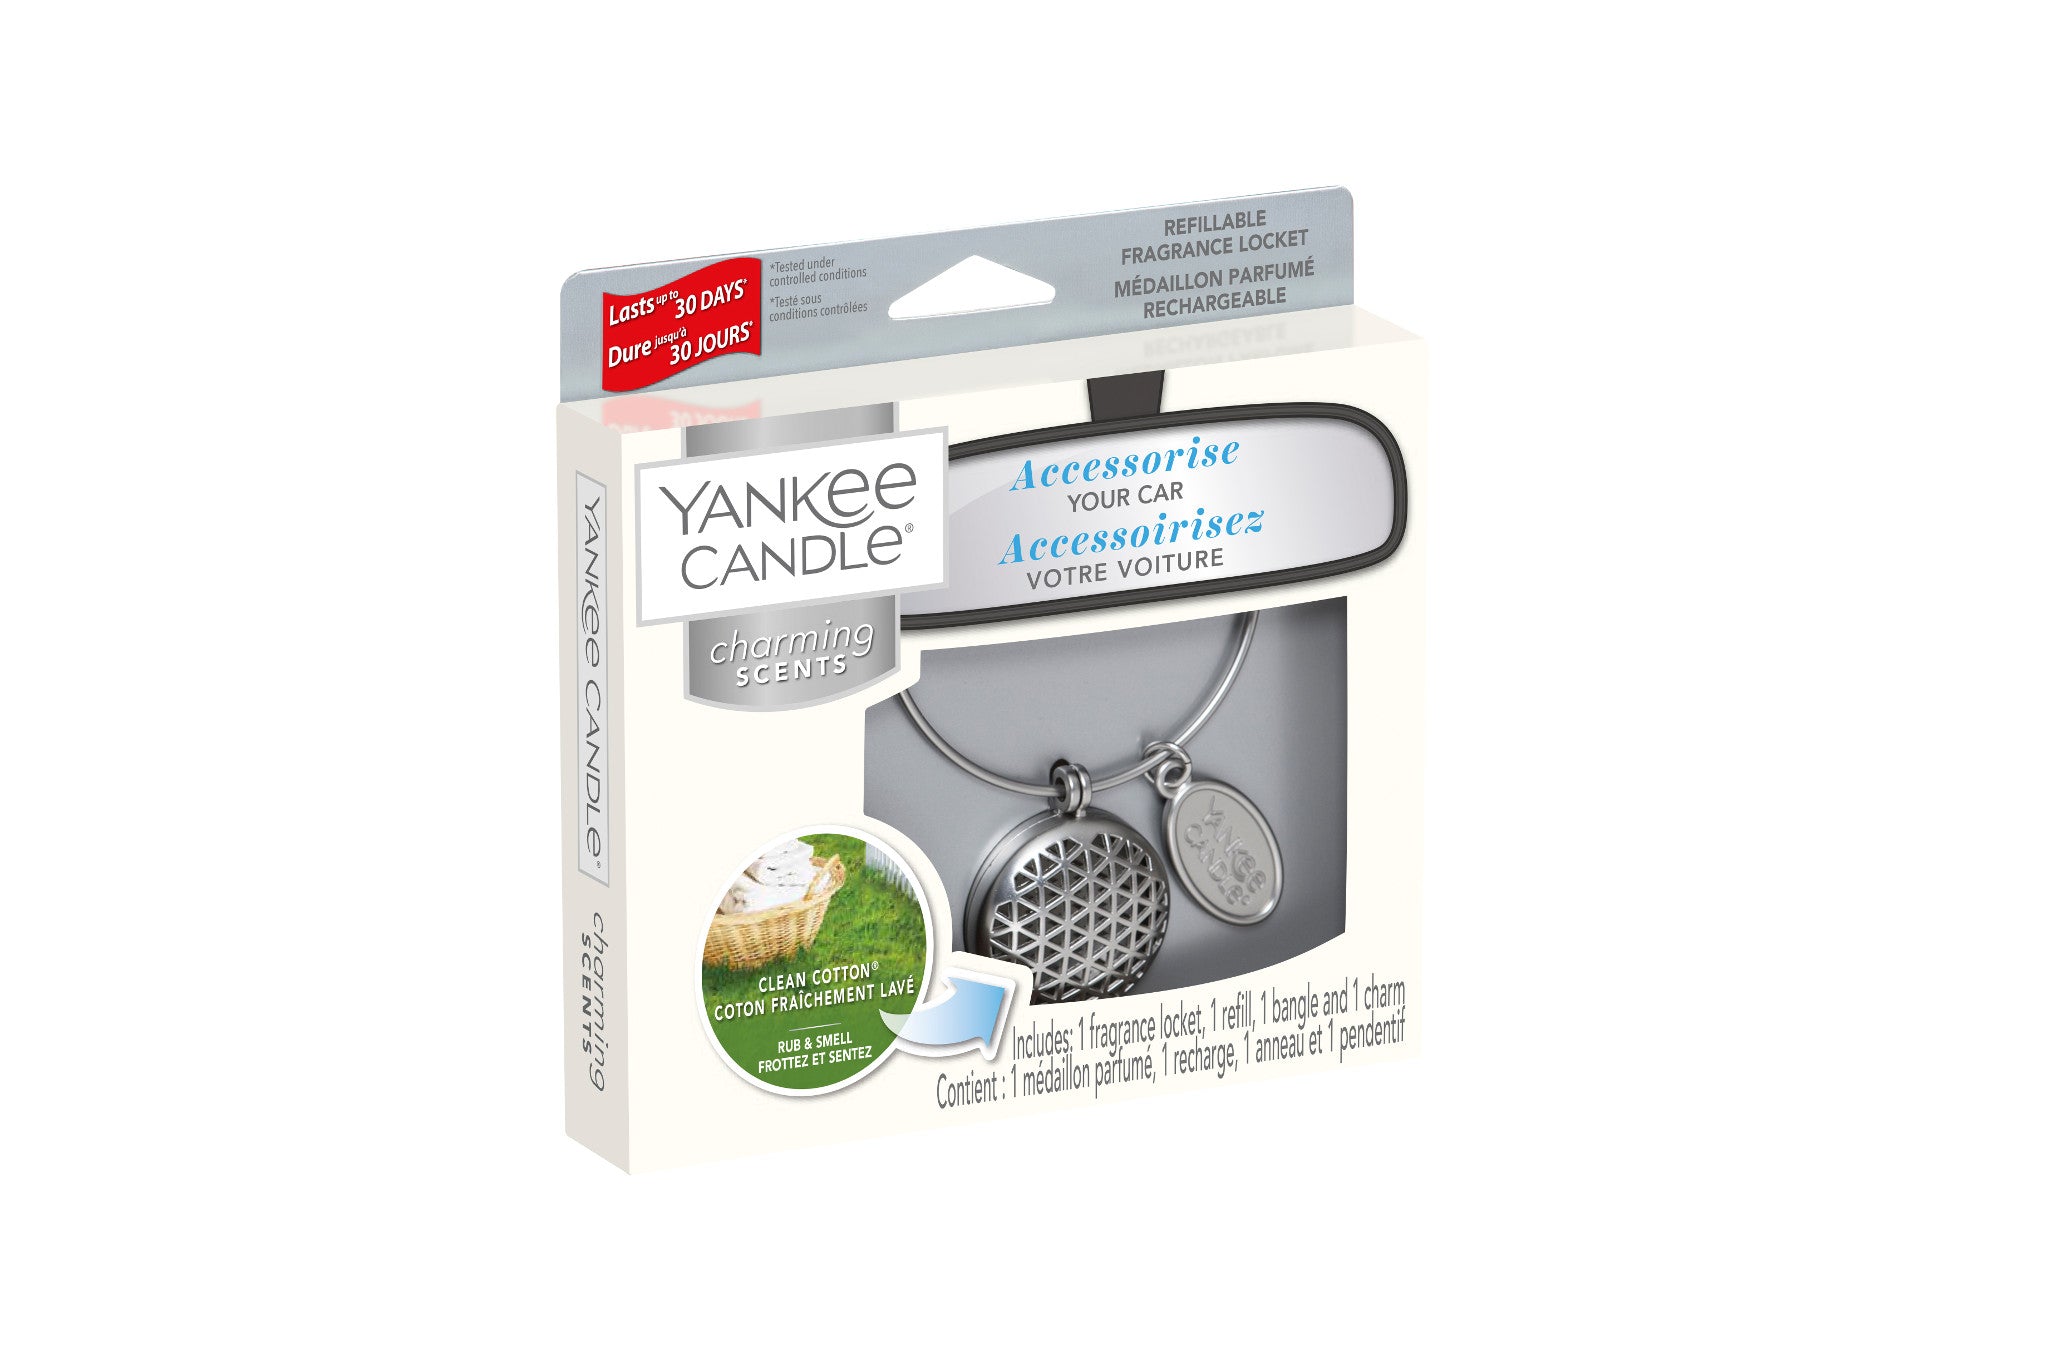 CLEAN COTTON -Yankee Candle- Charming Scents Kit Iniziale Geometric